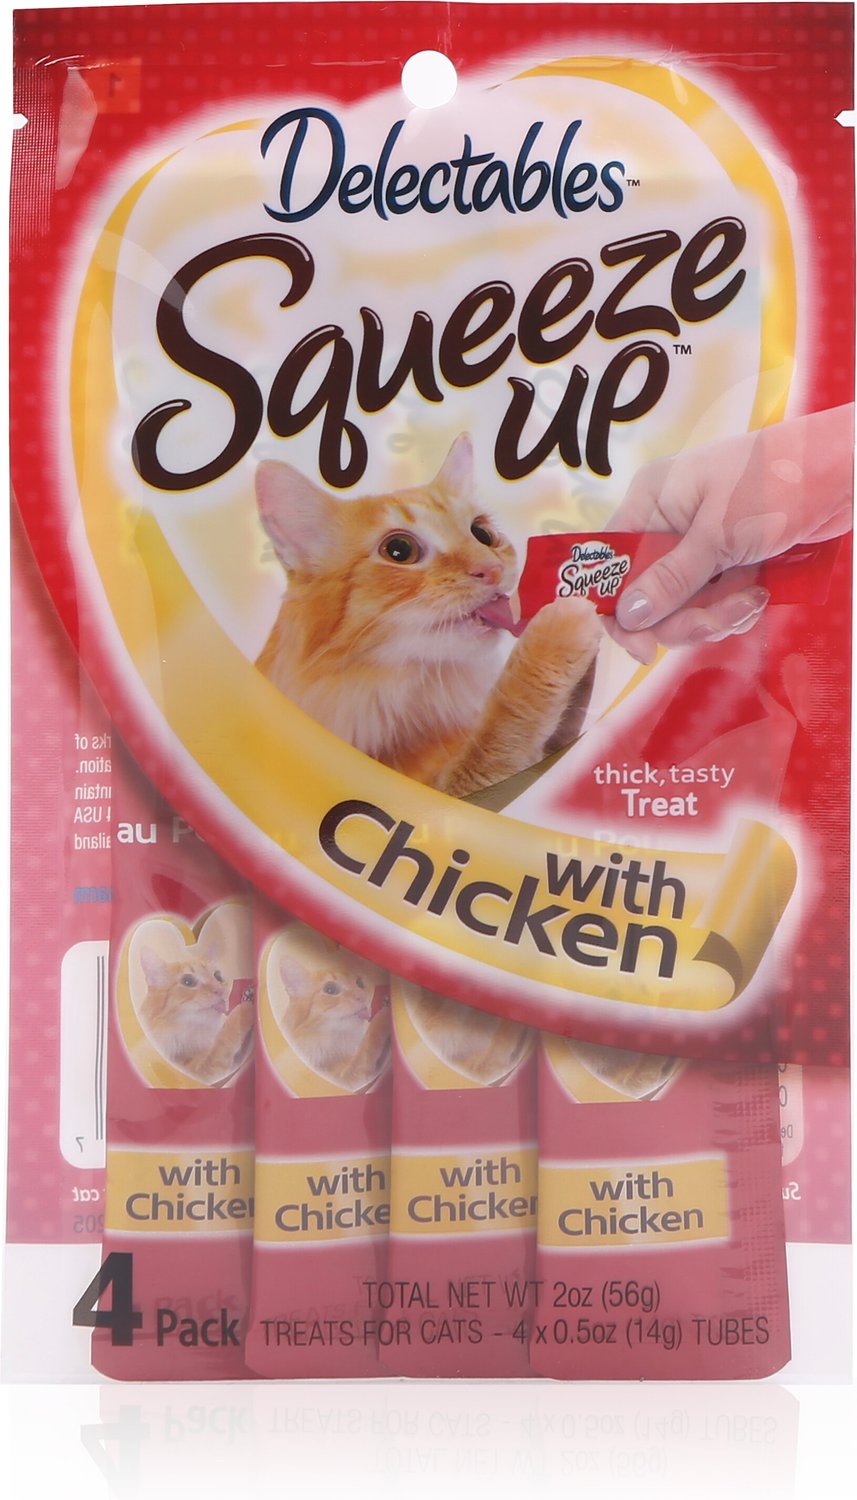 delectable squeeze ups